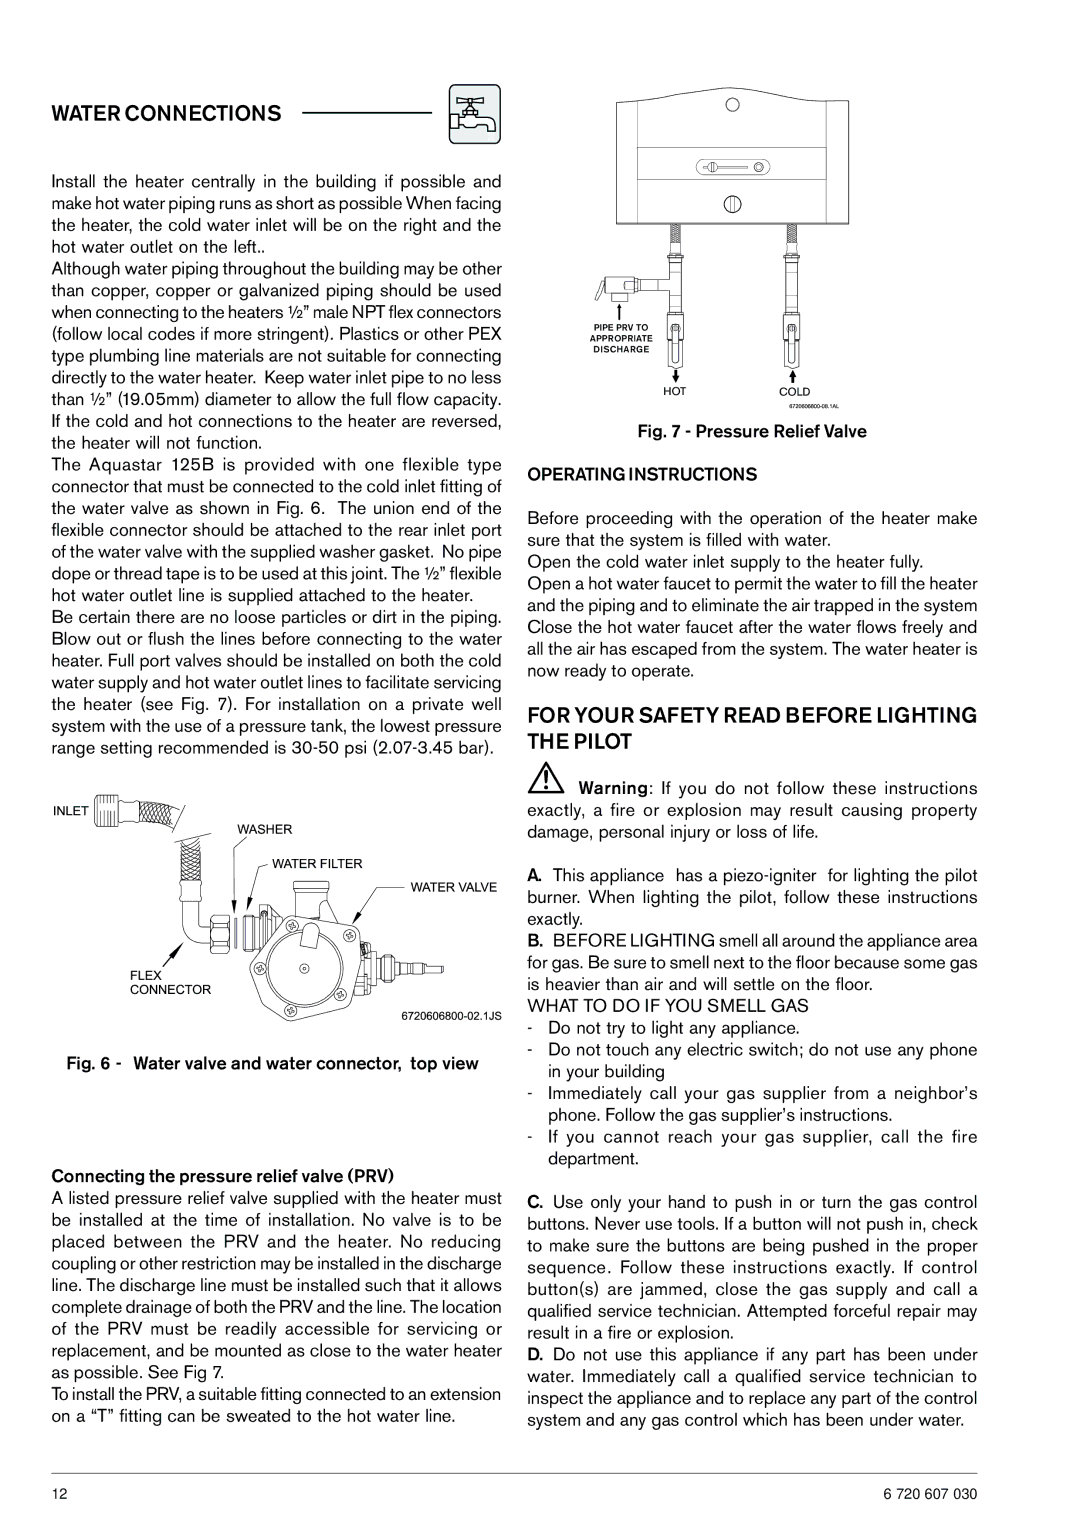 Bosch Appliances 125B NG Water Connections, For Your Safety Read Before Lighting the Pilot, Operating Instructions 